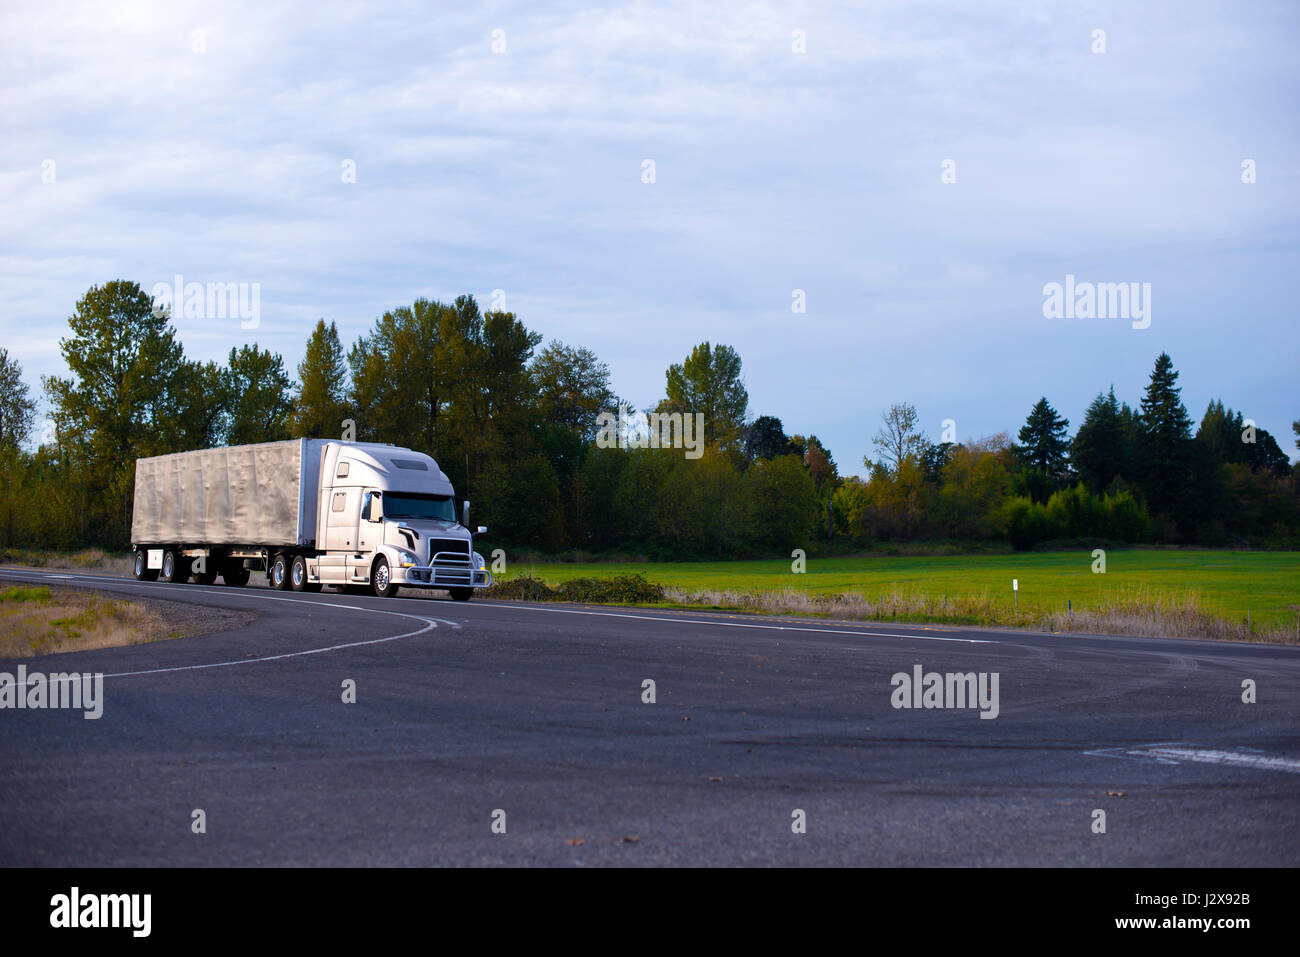 Excellent modern long haul silver big rig semi truck with a protective grille and a covered trailer to transport commercial cargo moves on a broad hig Stock Photo